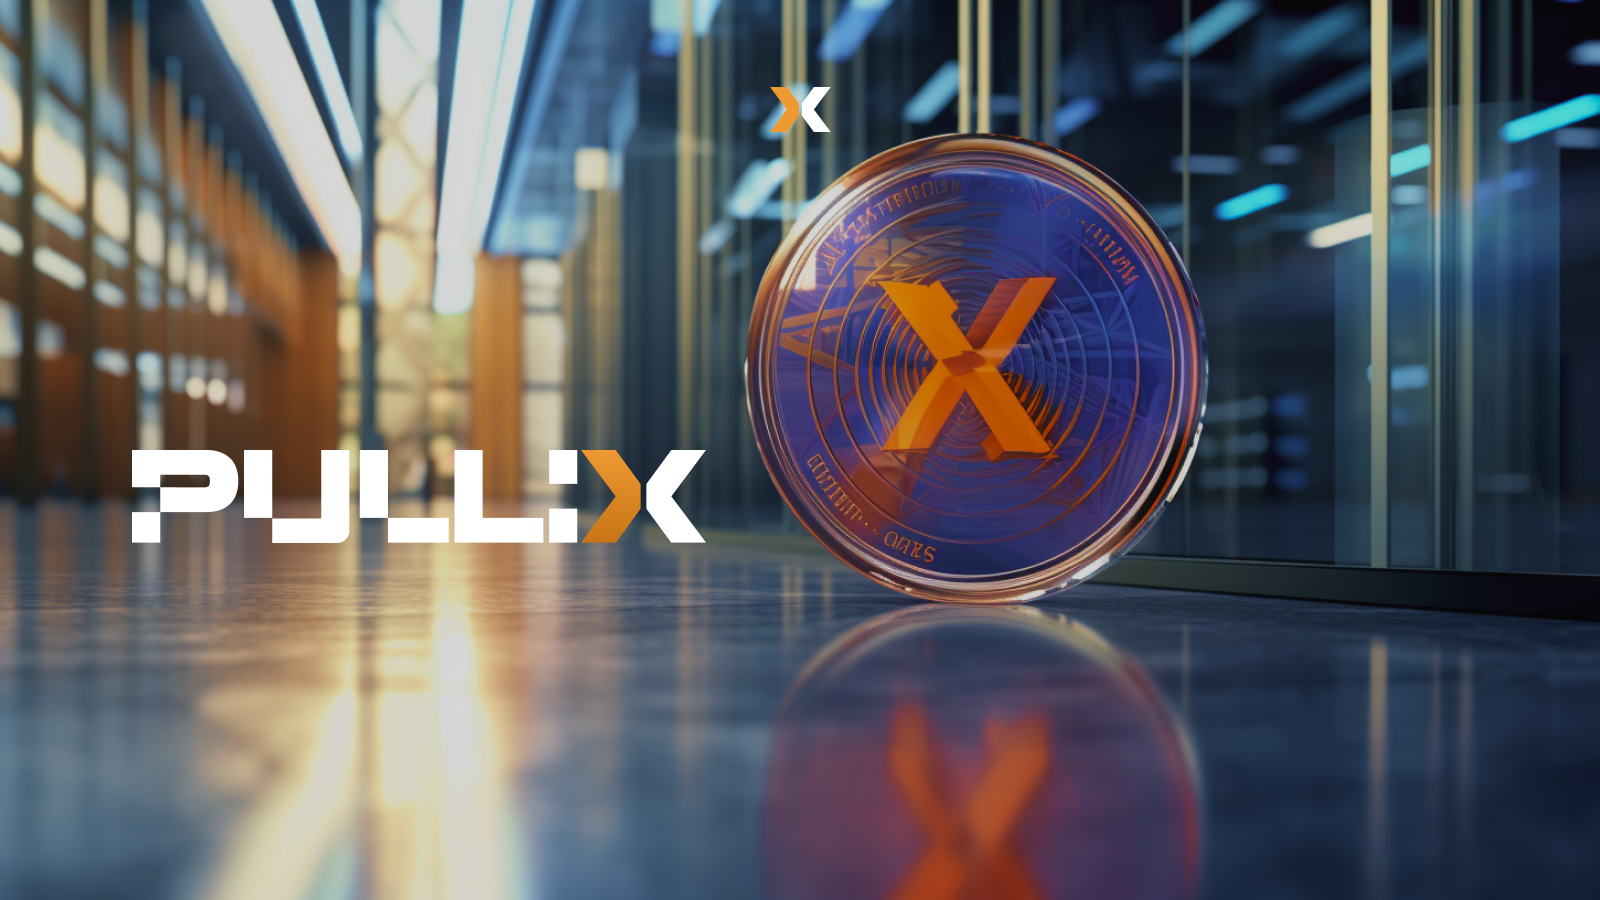 Pullix (PLX) Becomes The Best Crypto to Buy in Q1 While Aave (AAVE) and Conflux (CFX) Keep Losing Momentum